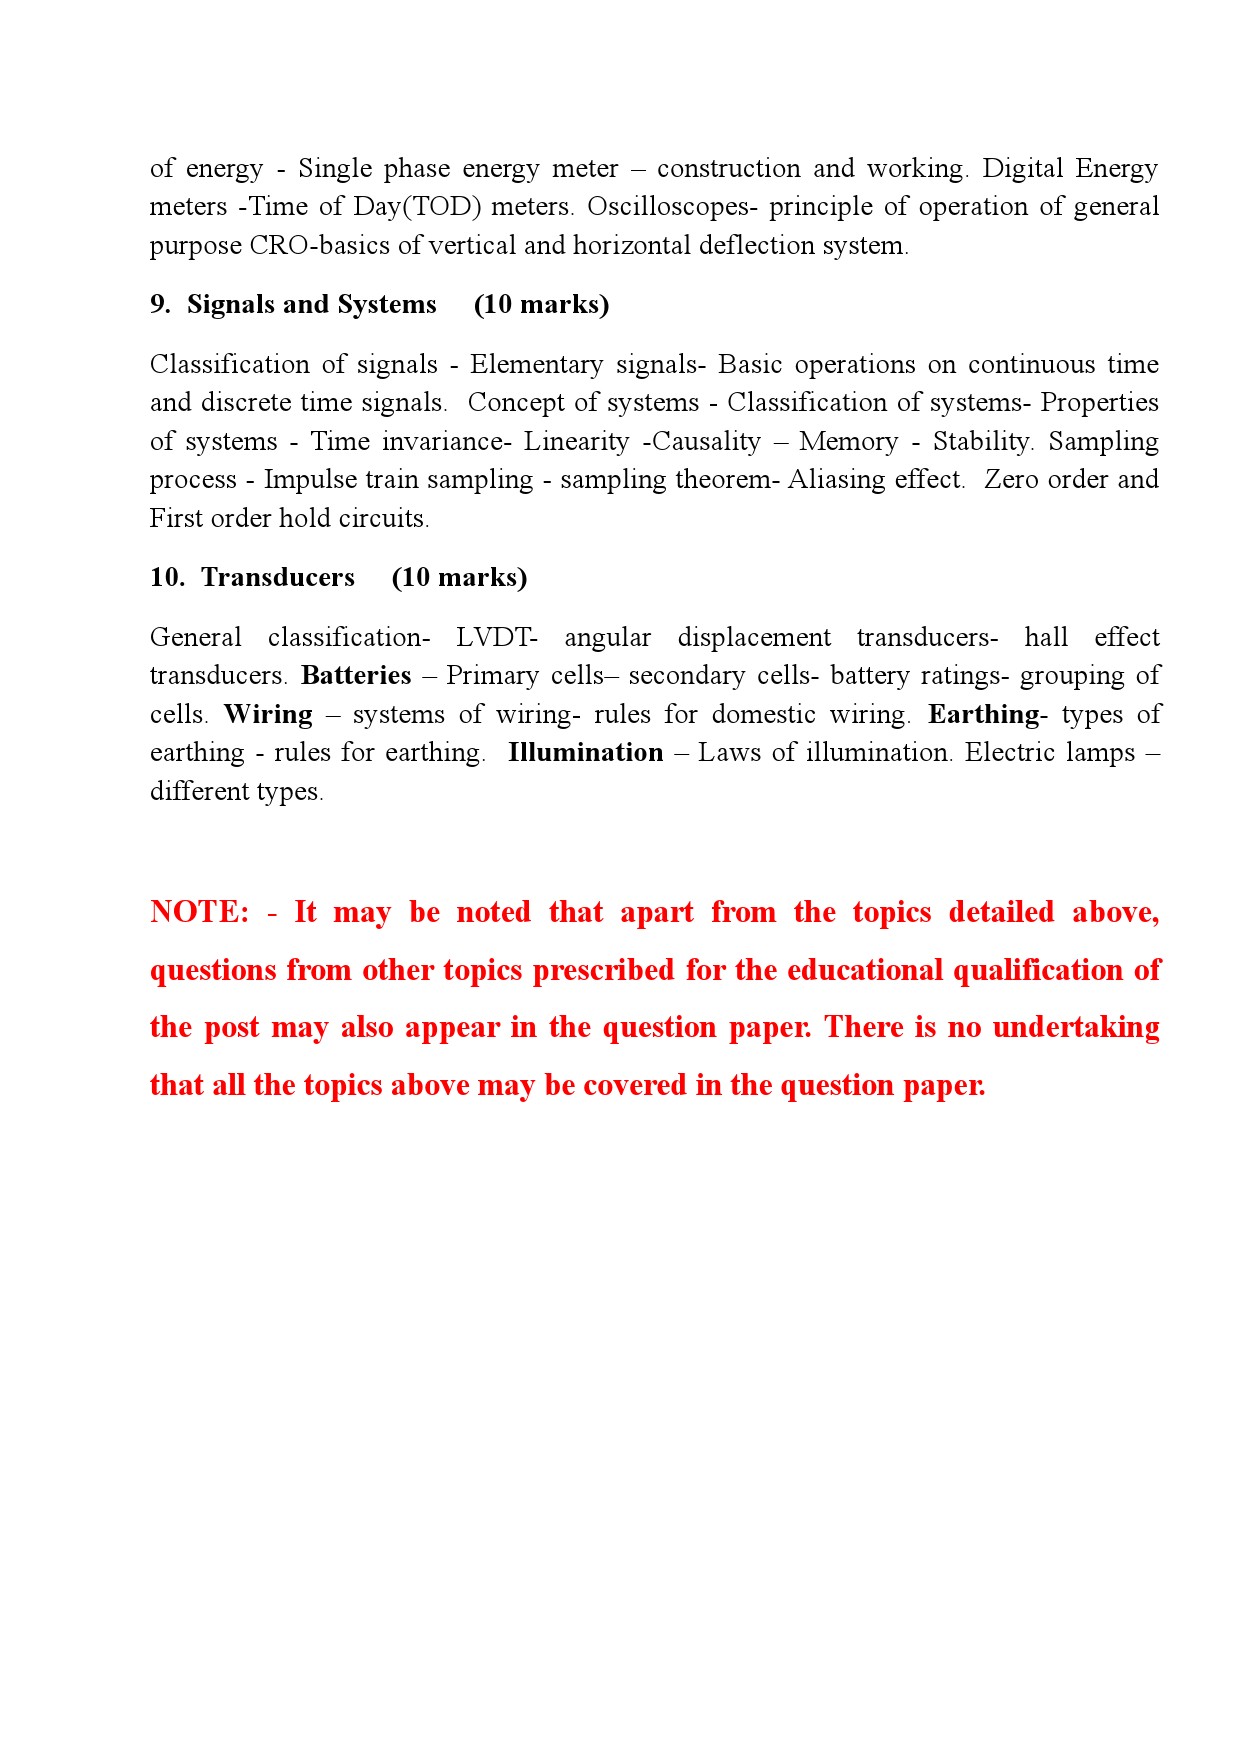 KPSC SYLLABUS OR THE POST OF FOREMAN ELECTRICAL - Notification Image 3